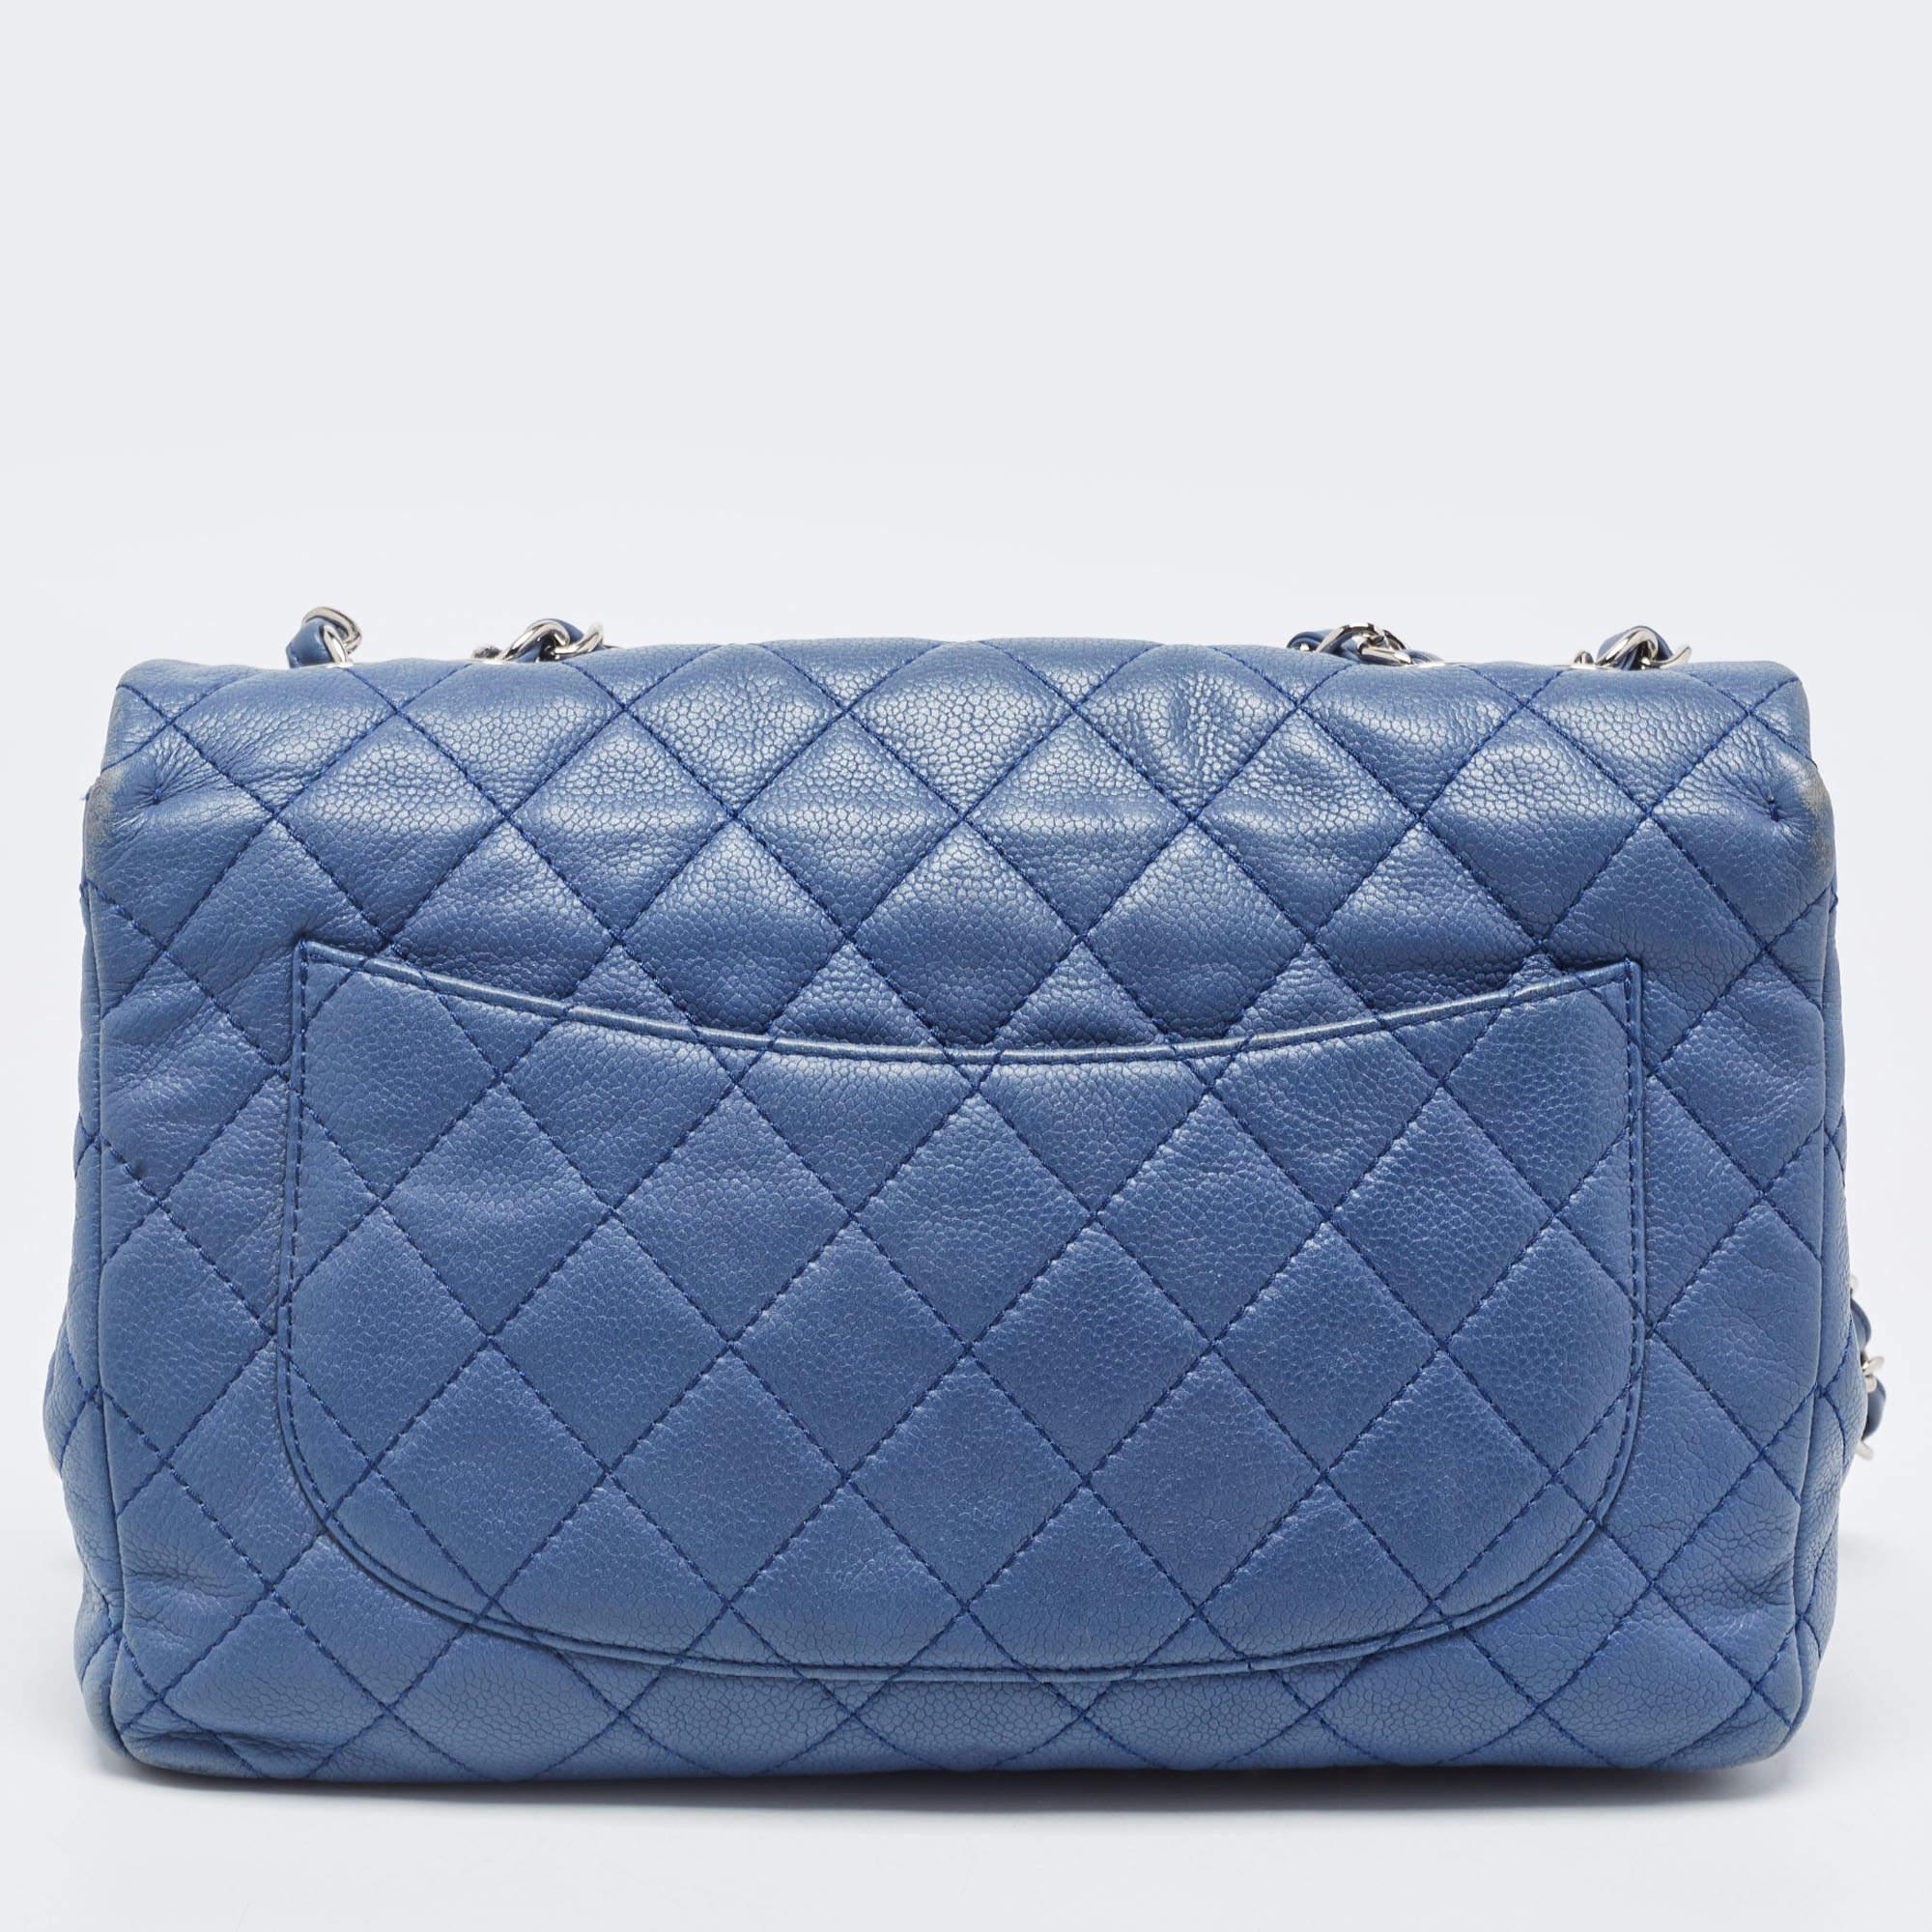 Chanel Blue Quilted Caviar Leather Jumbo Classic Single Flap Bag For Sale 4